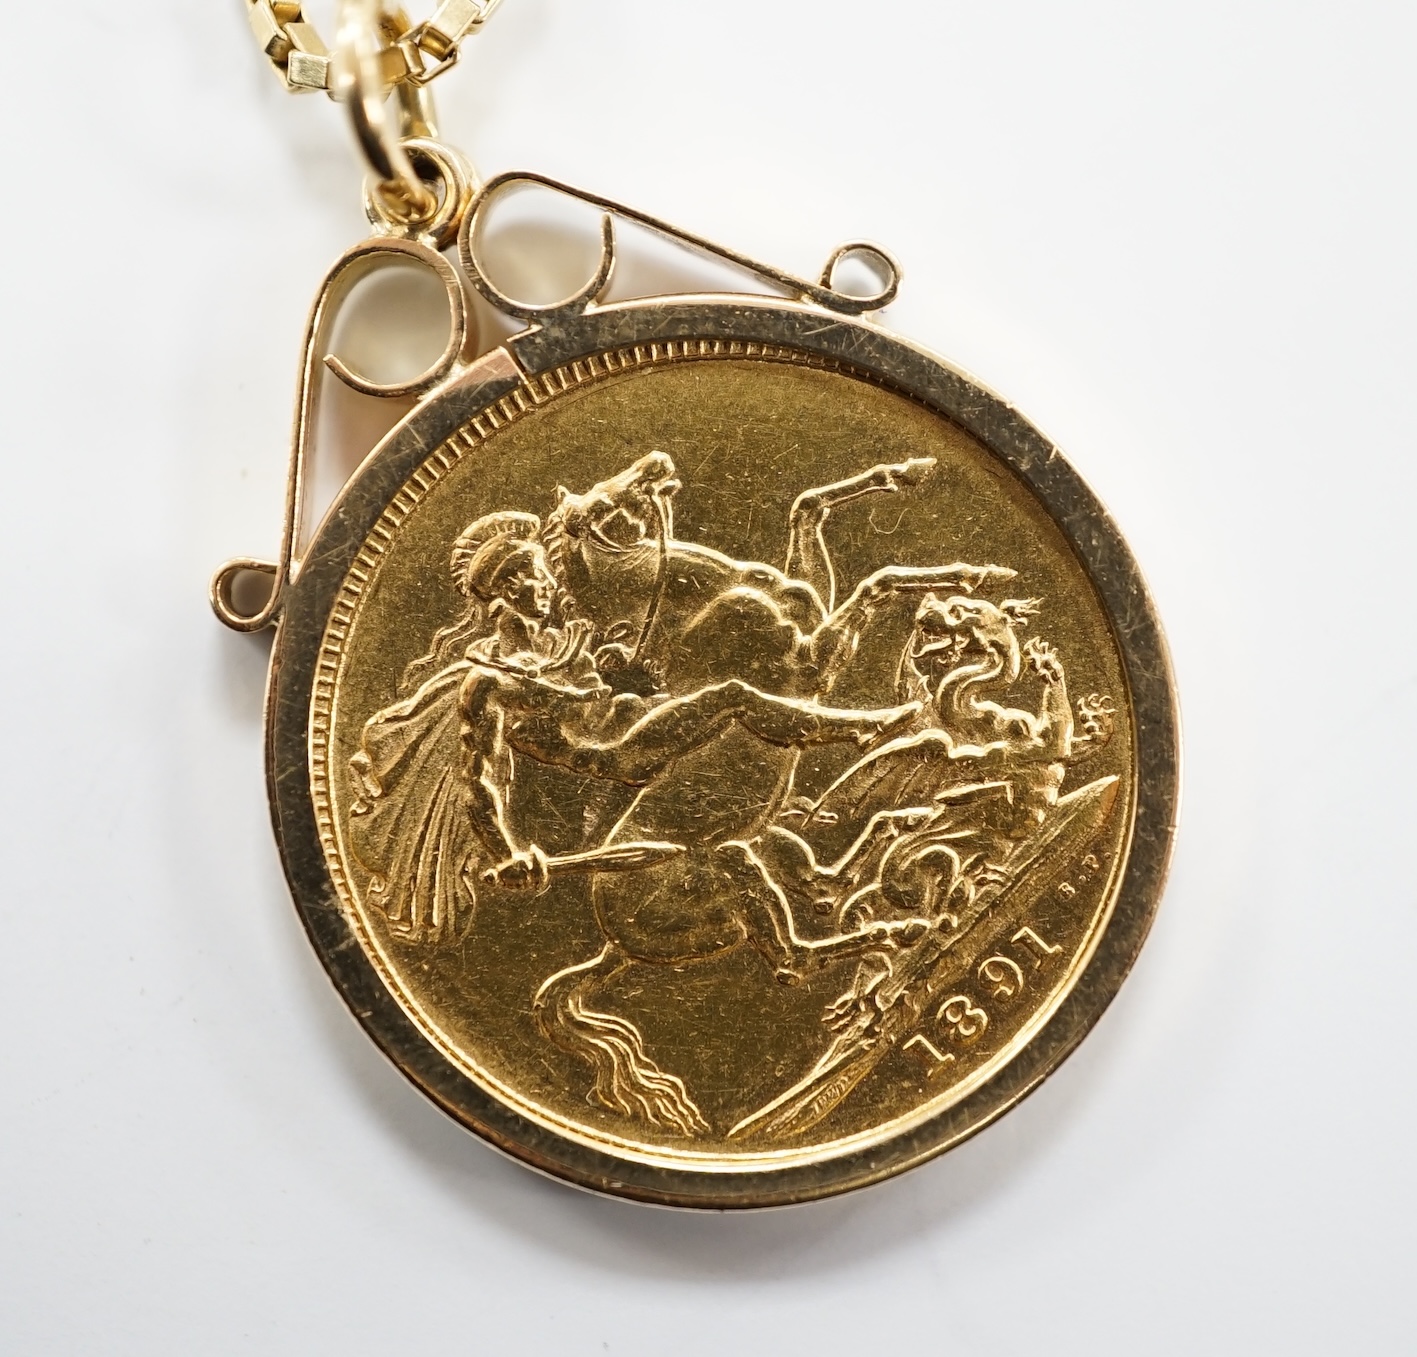 A Victoria 1891 gold sovereign, now in a modern 9ct gold pendant mount, on a yellow metal box link chain